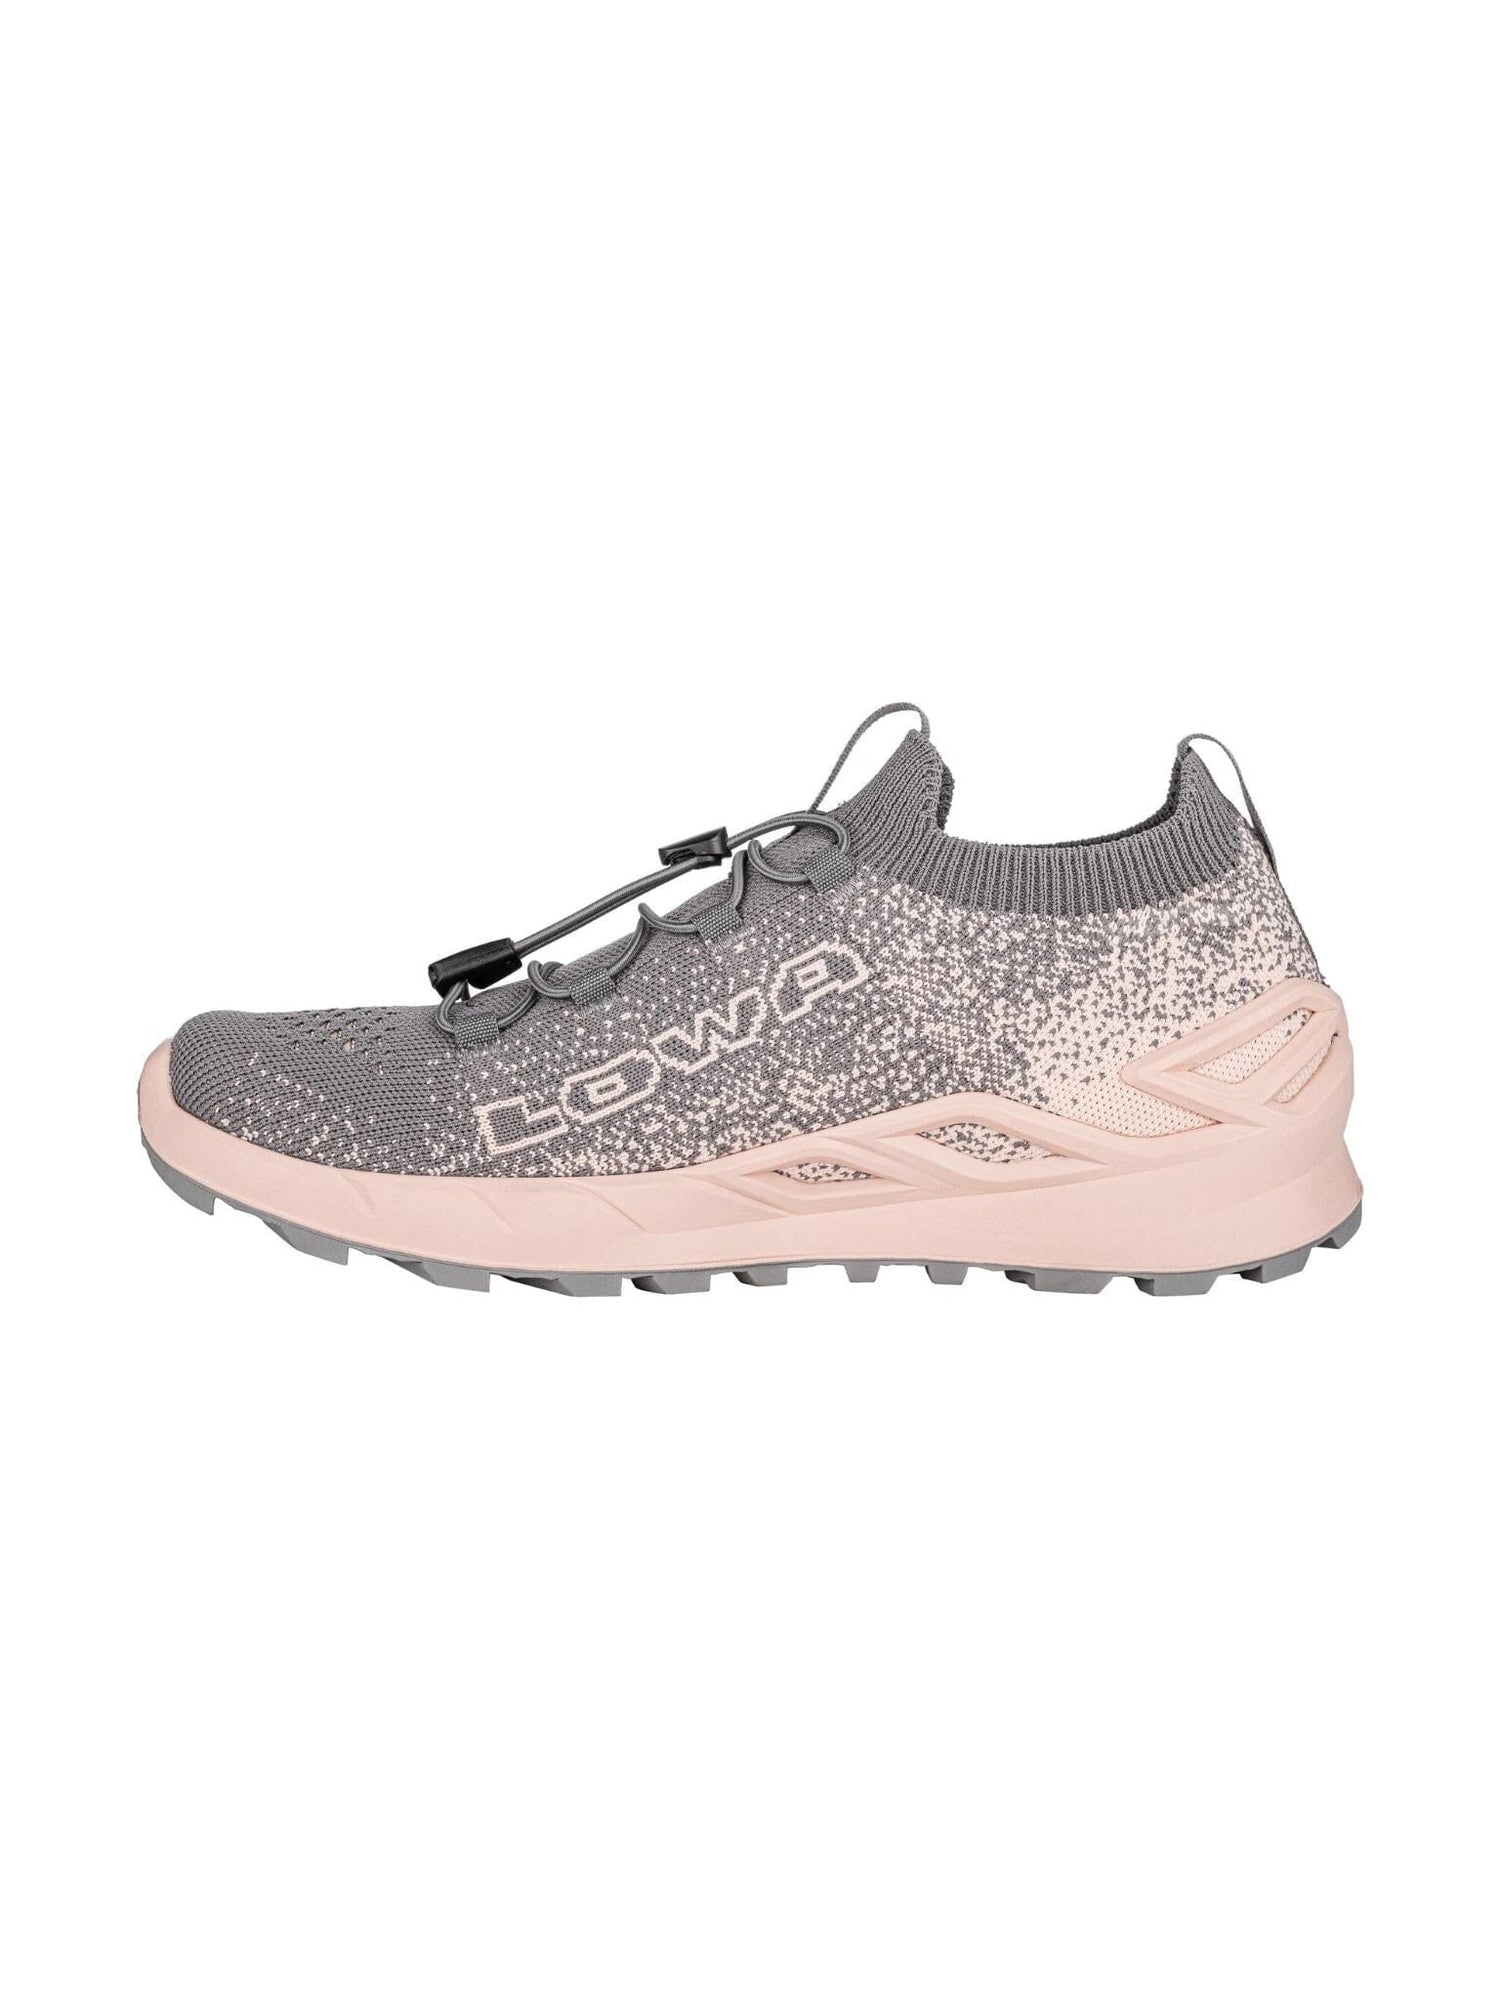 LOWA W's LOWA® Fusion Lo - Knitted for comfort Anthracite Rose Shoes